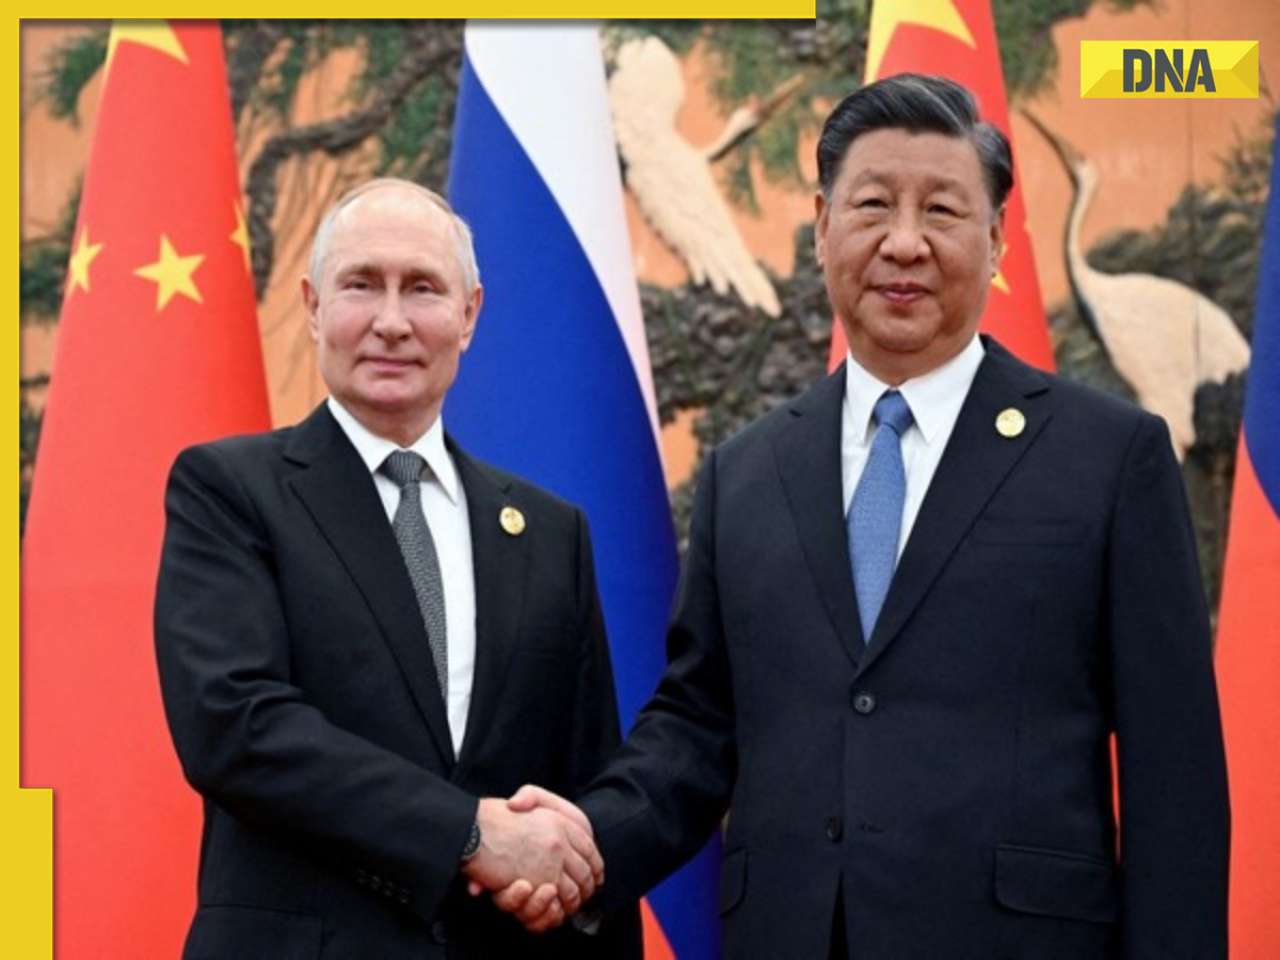 Russia's Vladimir Putin meets with China's leader Xi Jinping while on state visit to China